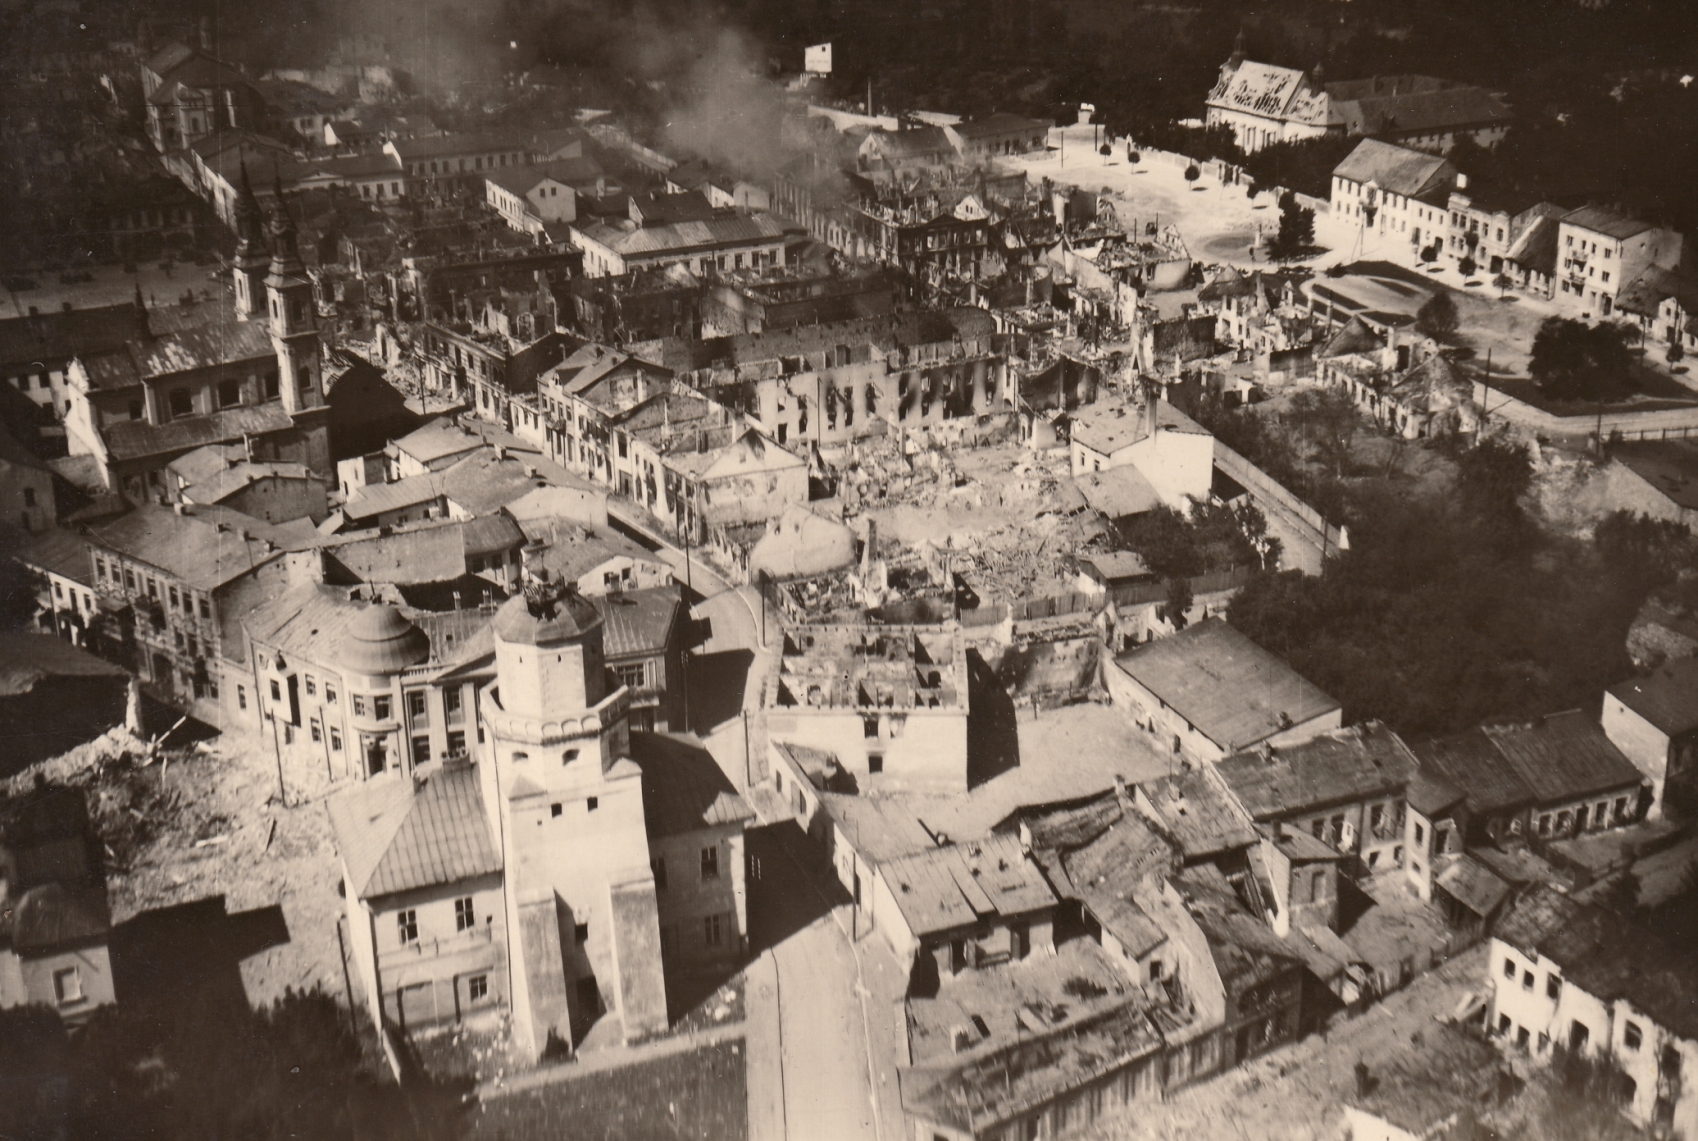 Bombed city shown from above. Deserted, bombed buildings, piles of bricks.